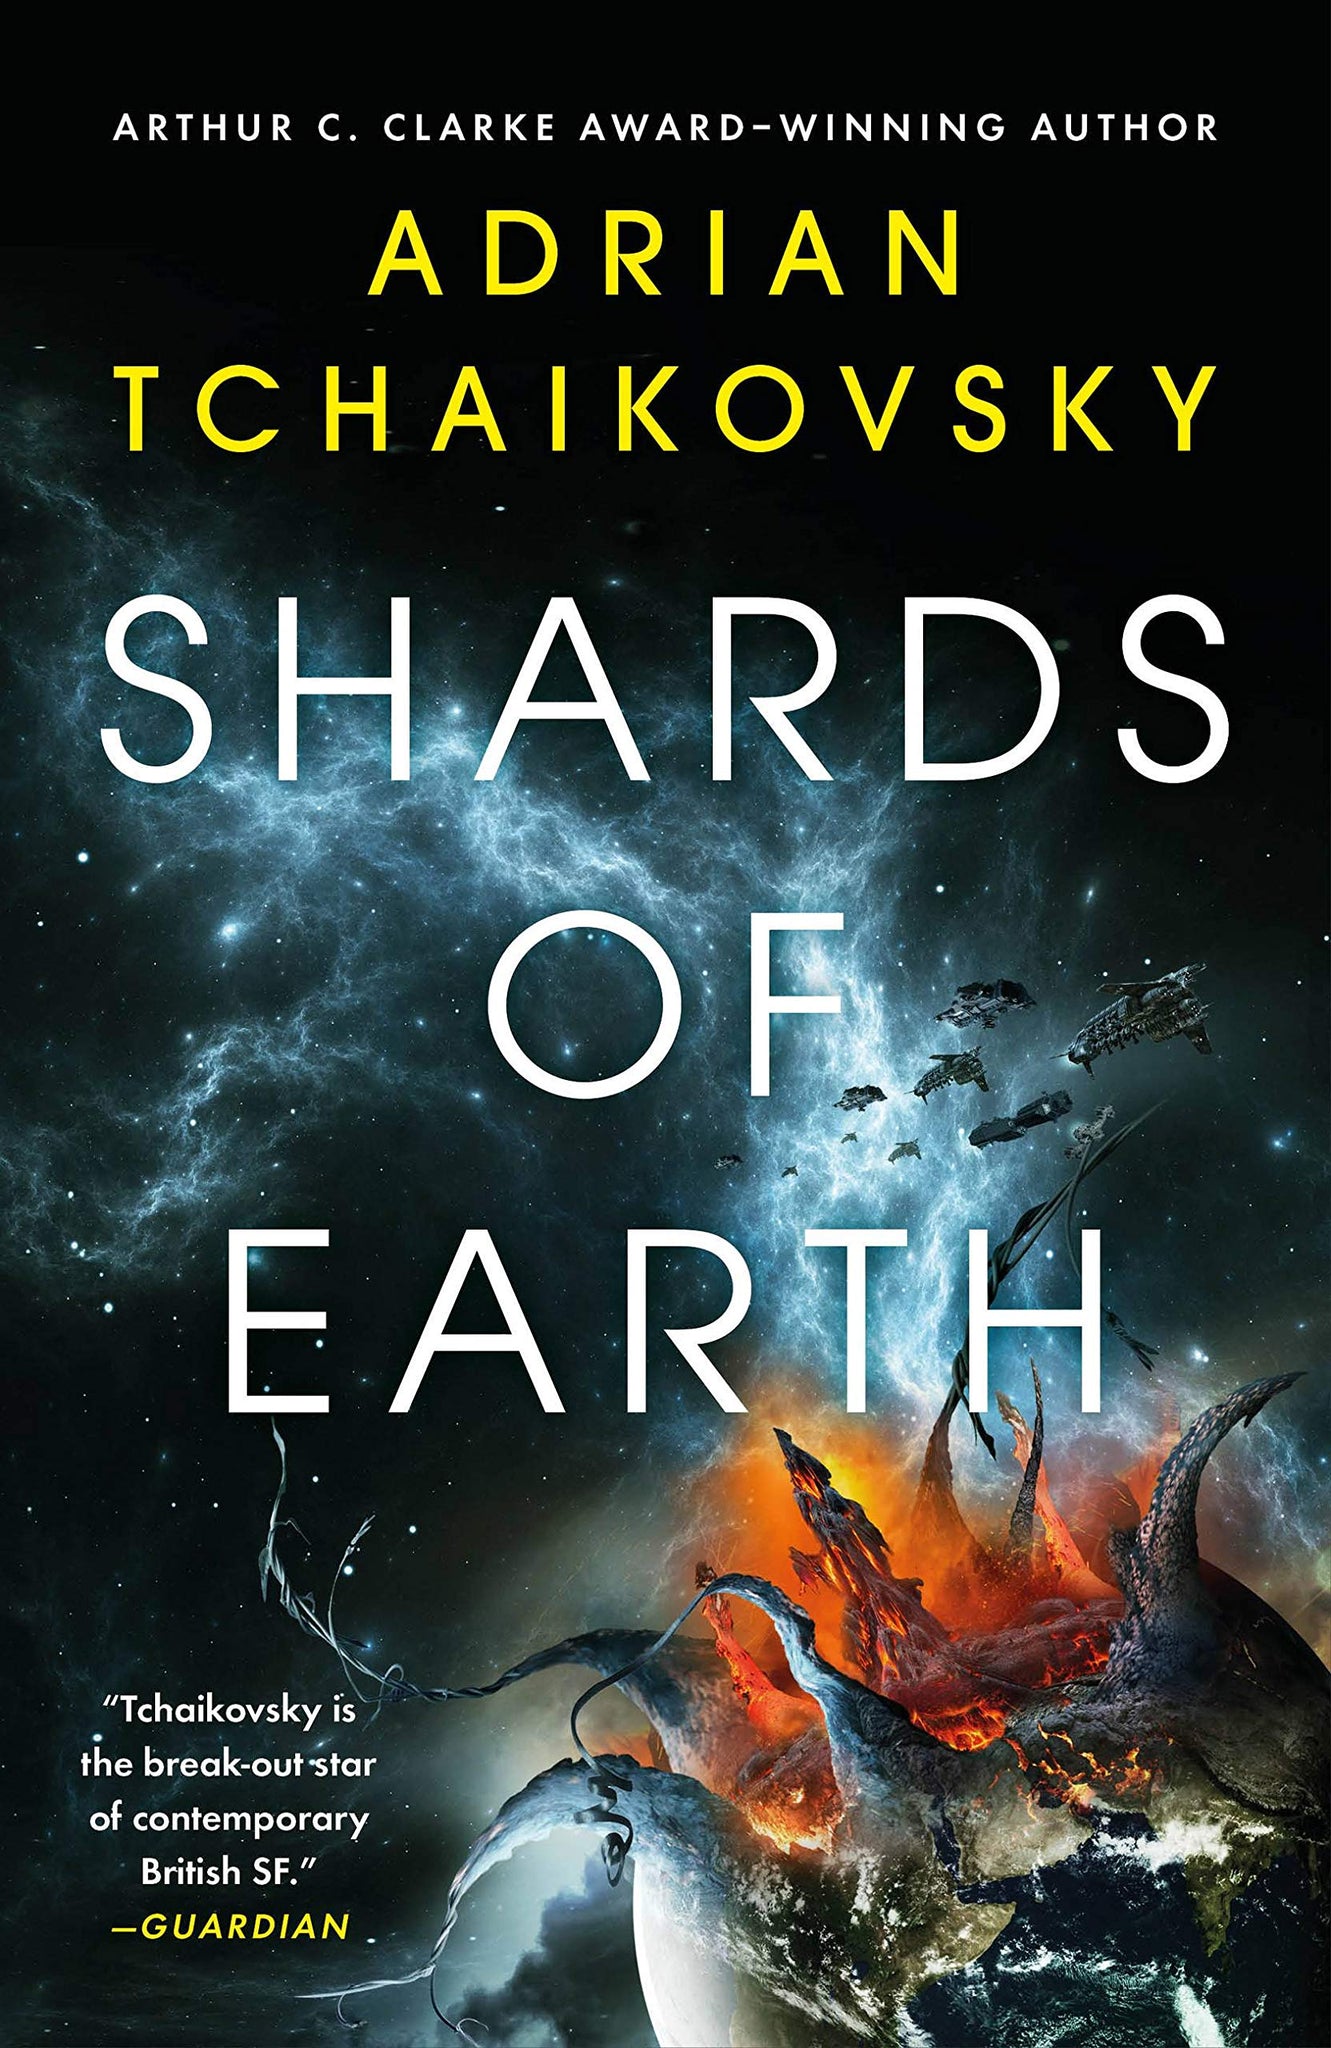 Final Architecture #1 : Shards of Earth by Adrian Tchaikovsky